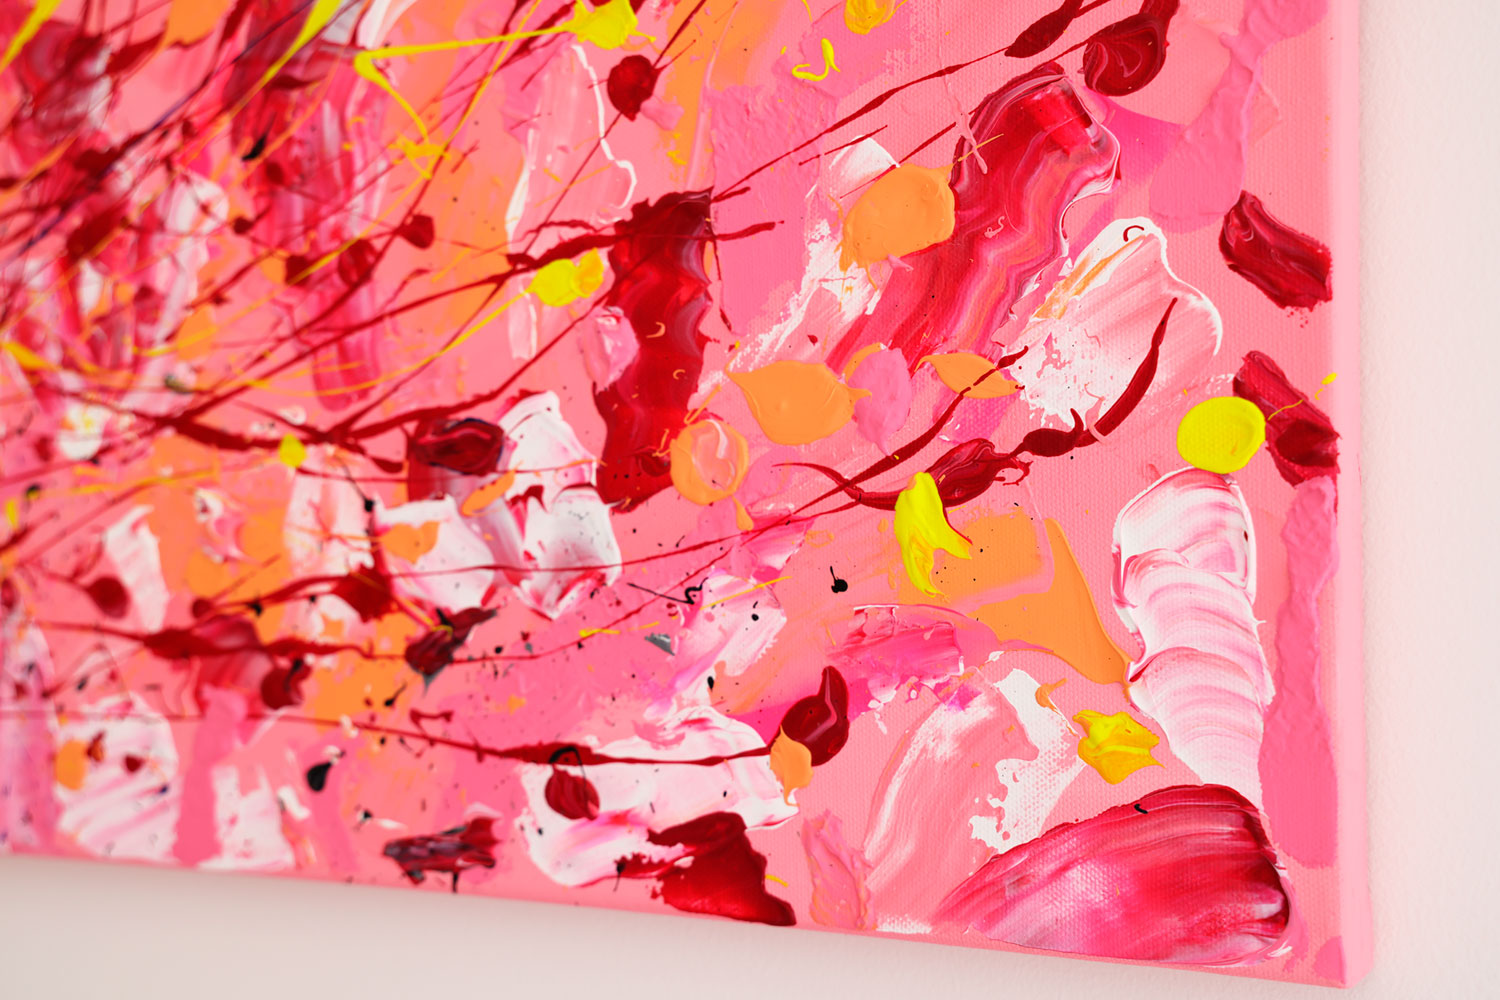 'Broken Blush' Abstract Painting from side view of canvasby Bridget Bradley.